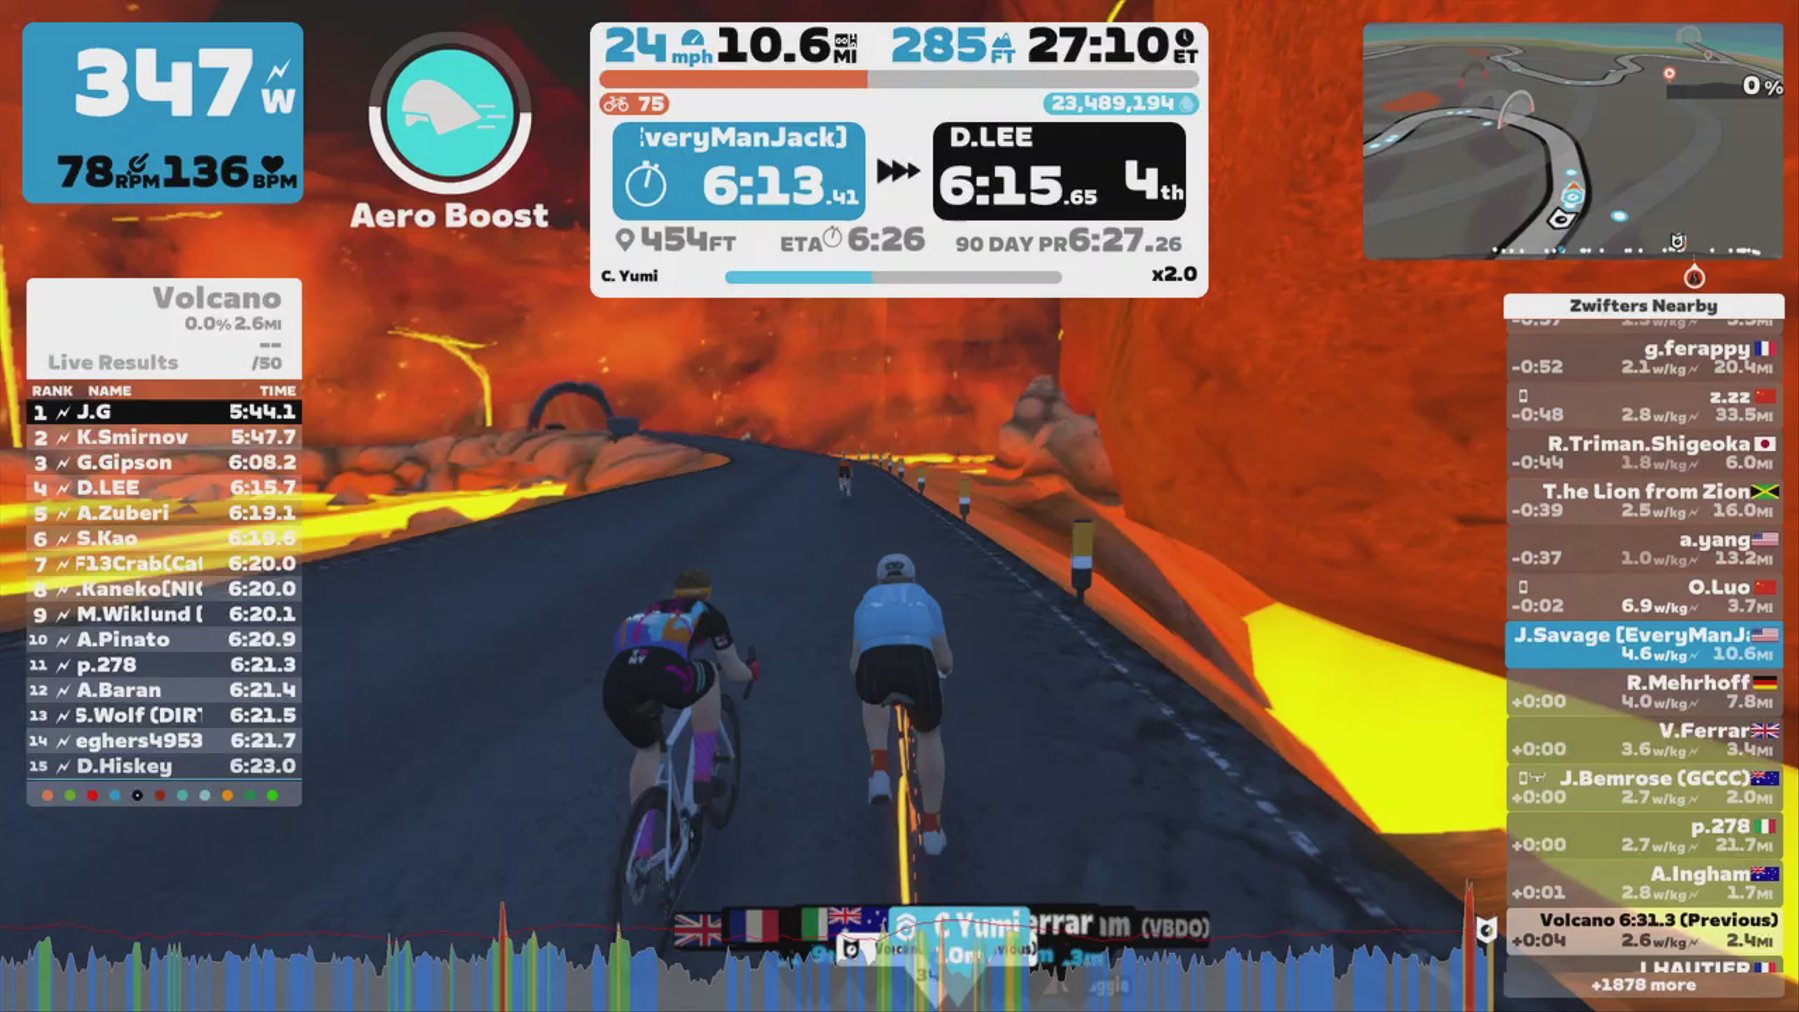 Zwift - Pacer Group Ride: Volcano Circuit in Watopia with Yumi